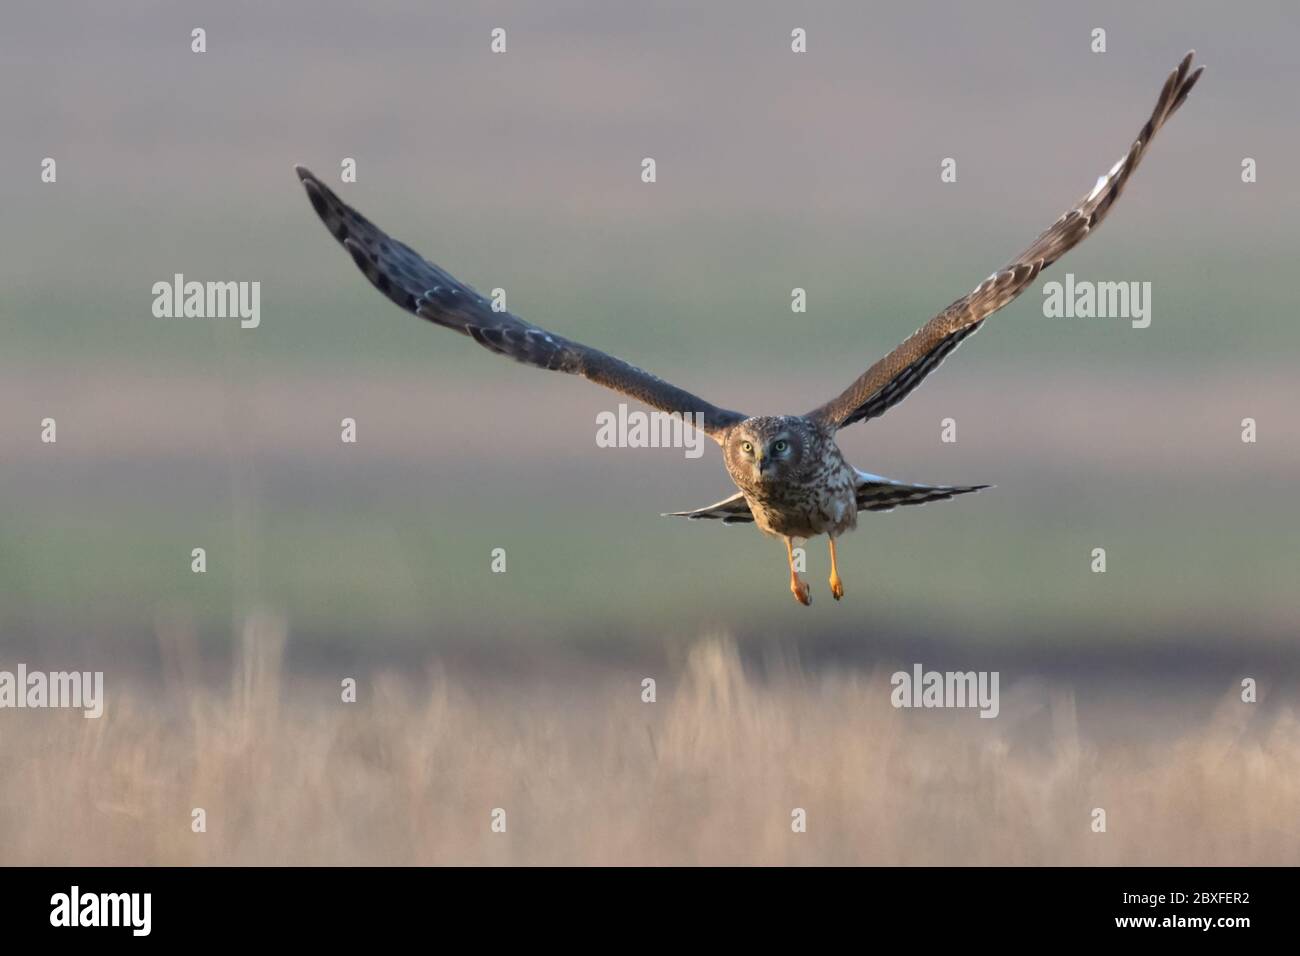 Northern Harrier (Circus cyaneus). Hen Harrier or Northern Harrier is long-winged, long-tailed hawk of open grassland and marshes. Stock Photo